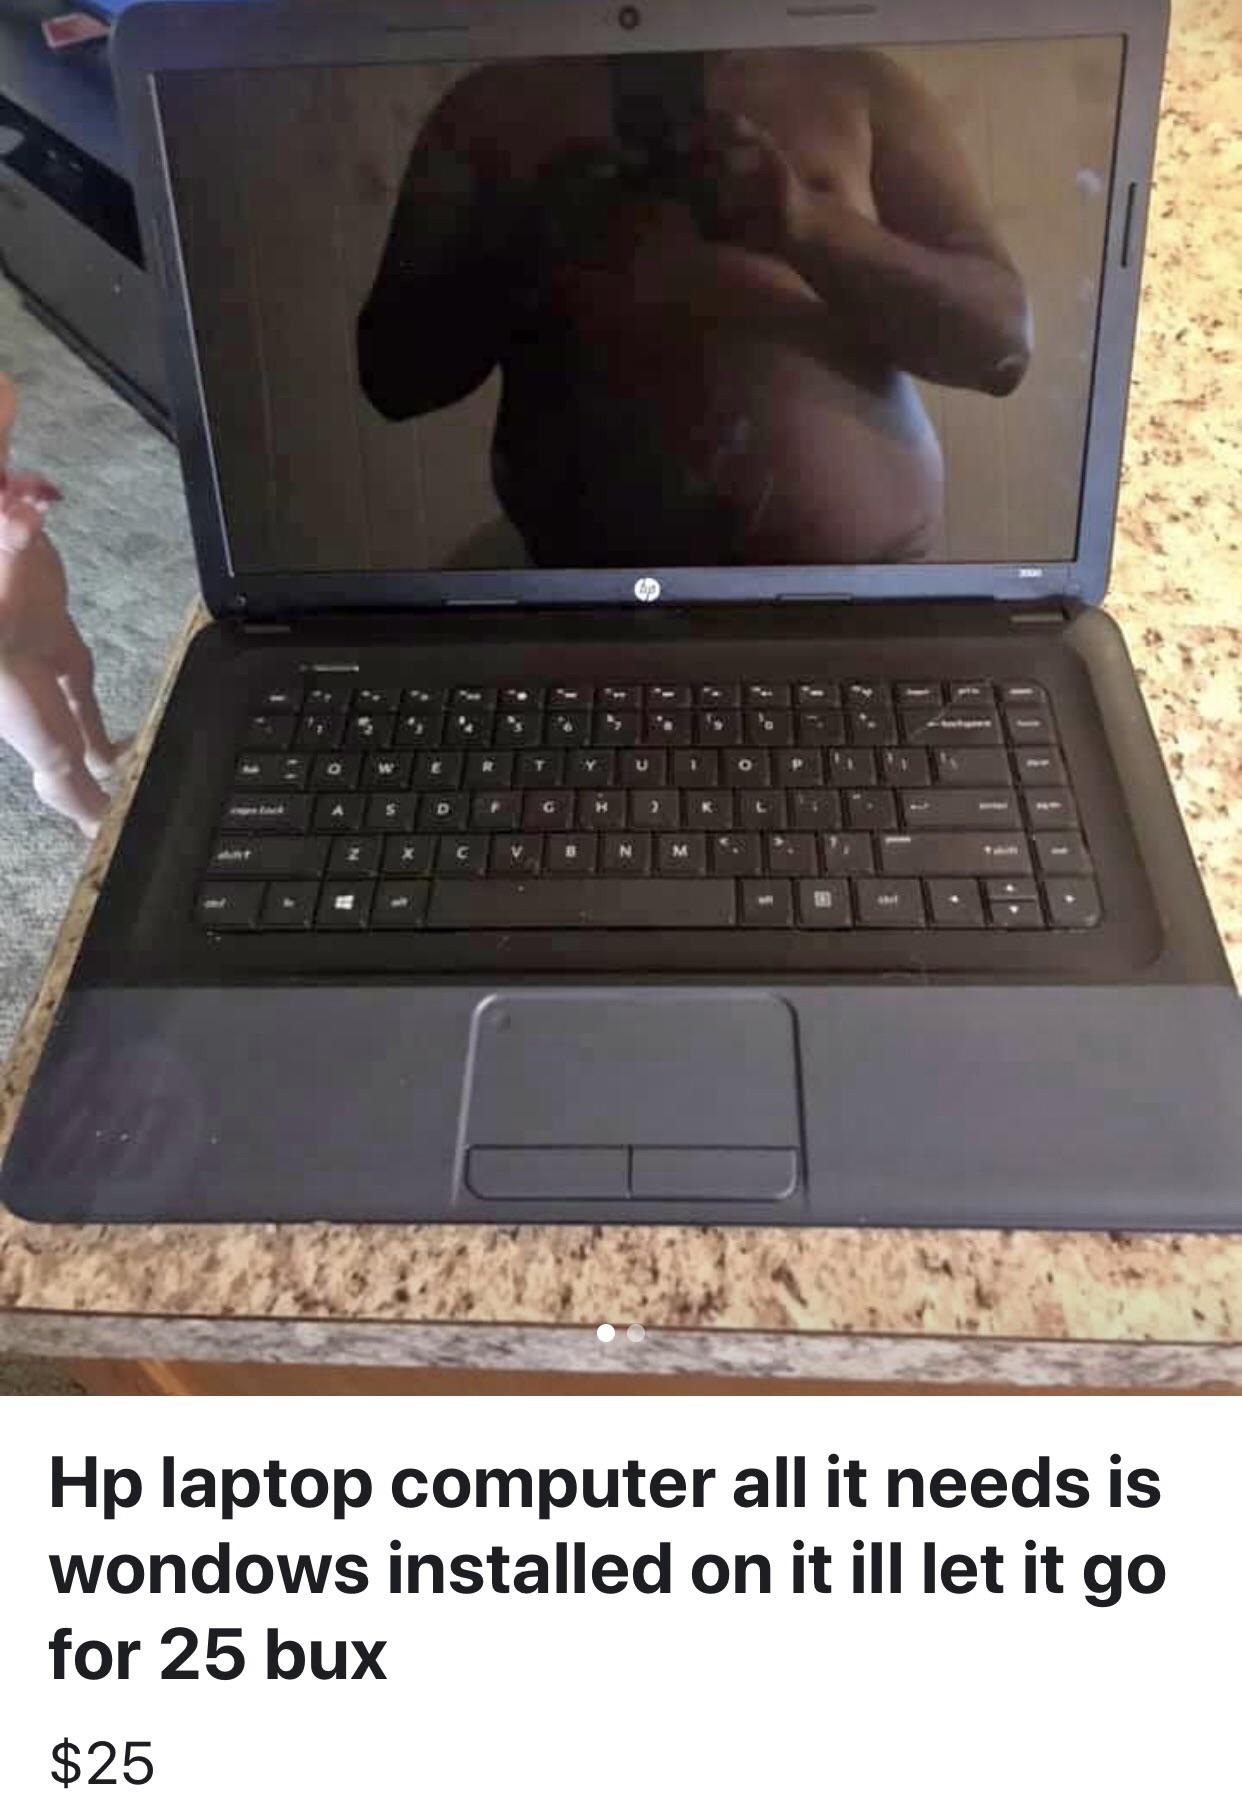 netbook - Hp laptop computer all it needs is wondows installed on it ill let it go for 25 bux $25